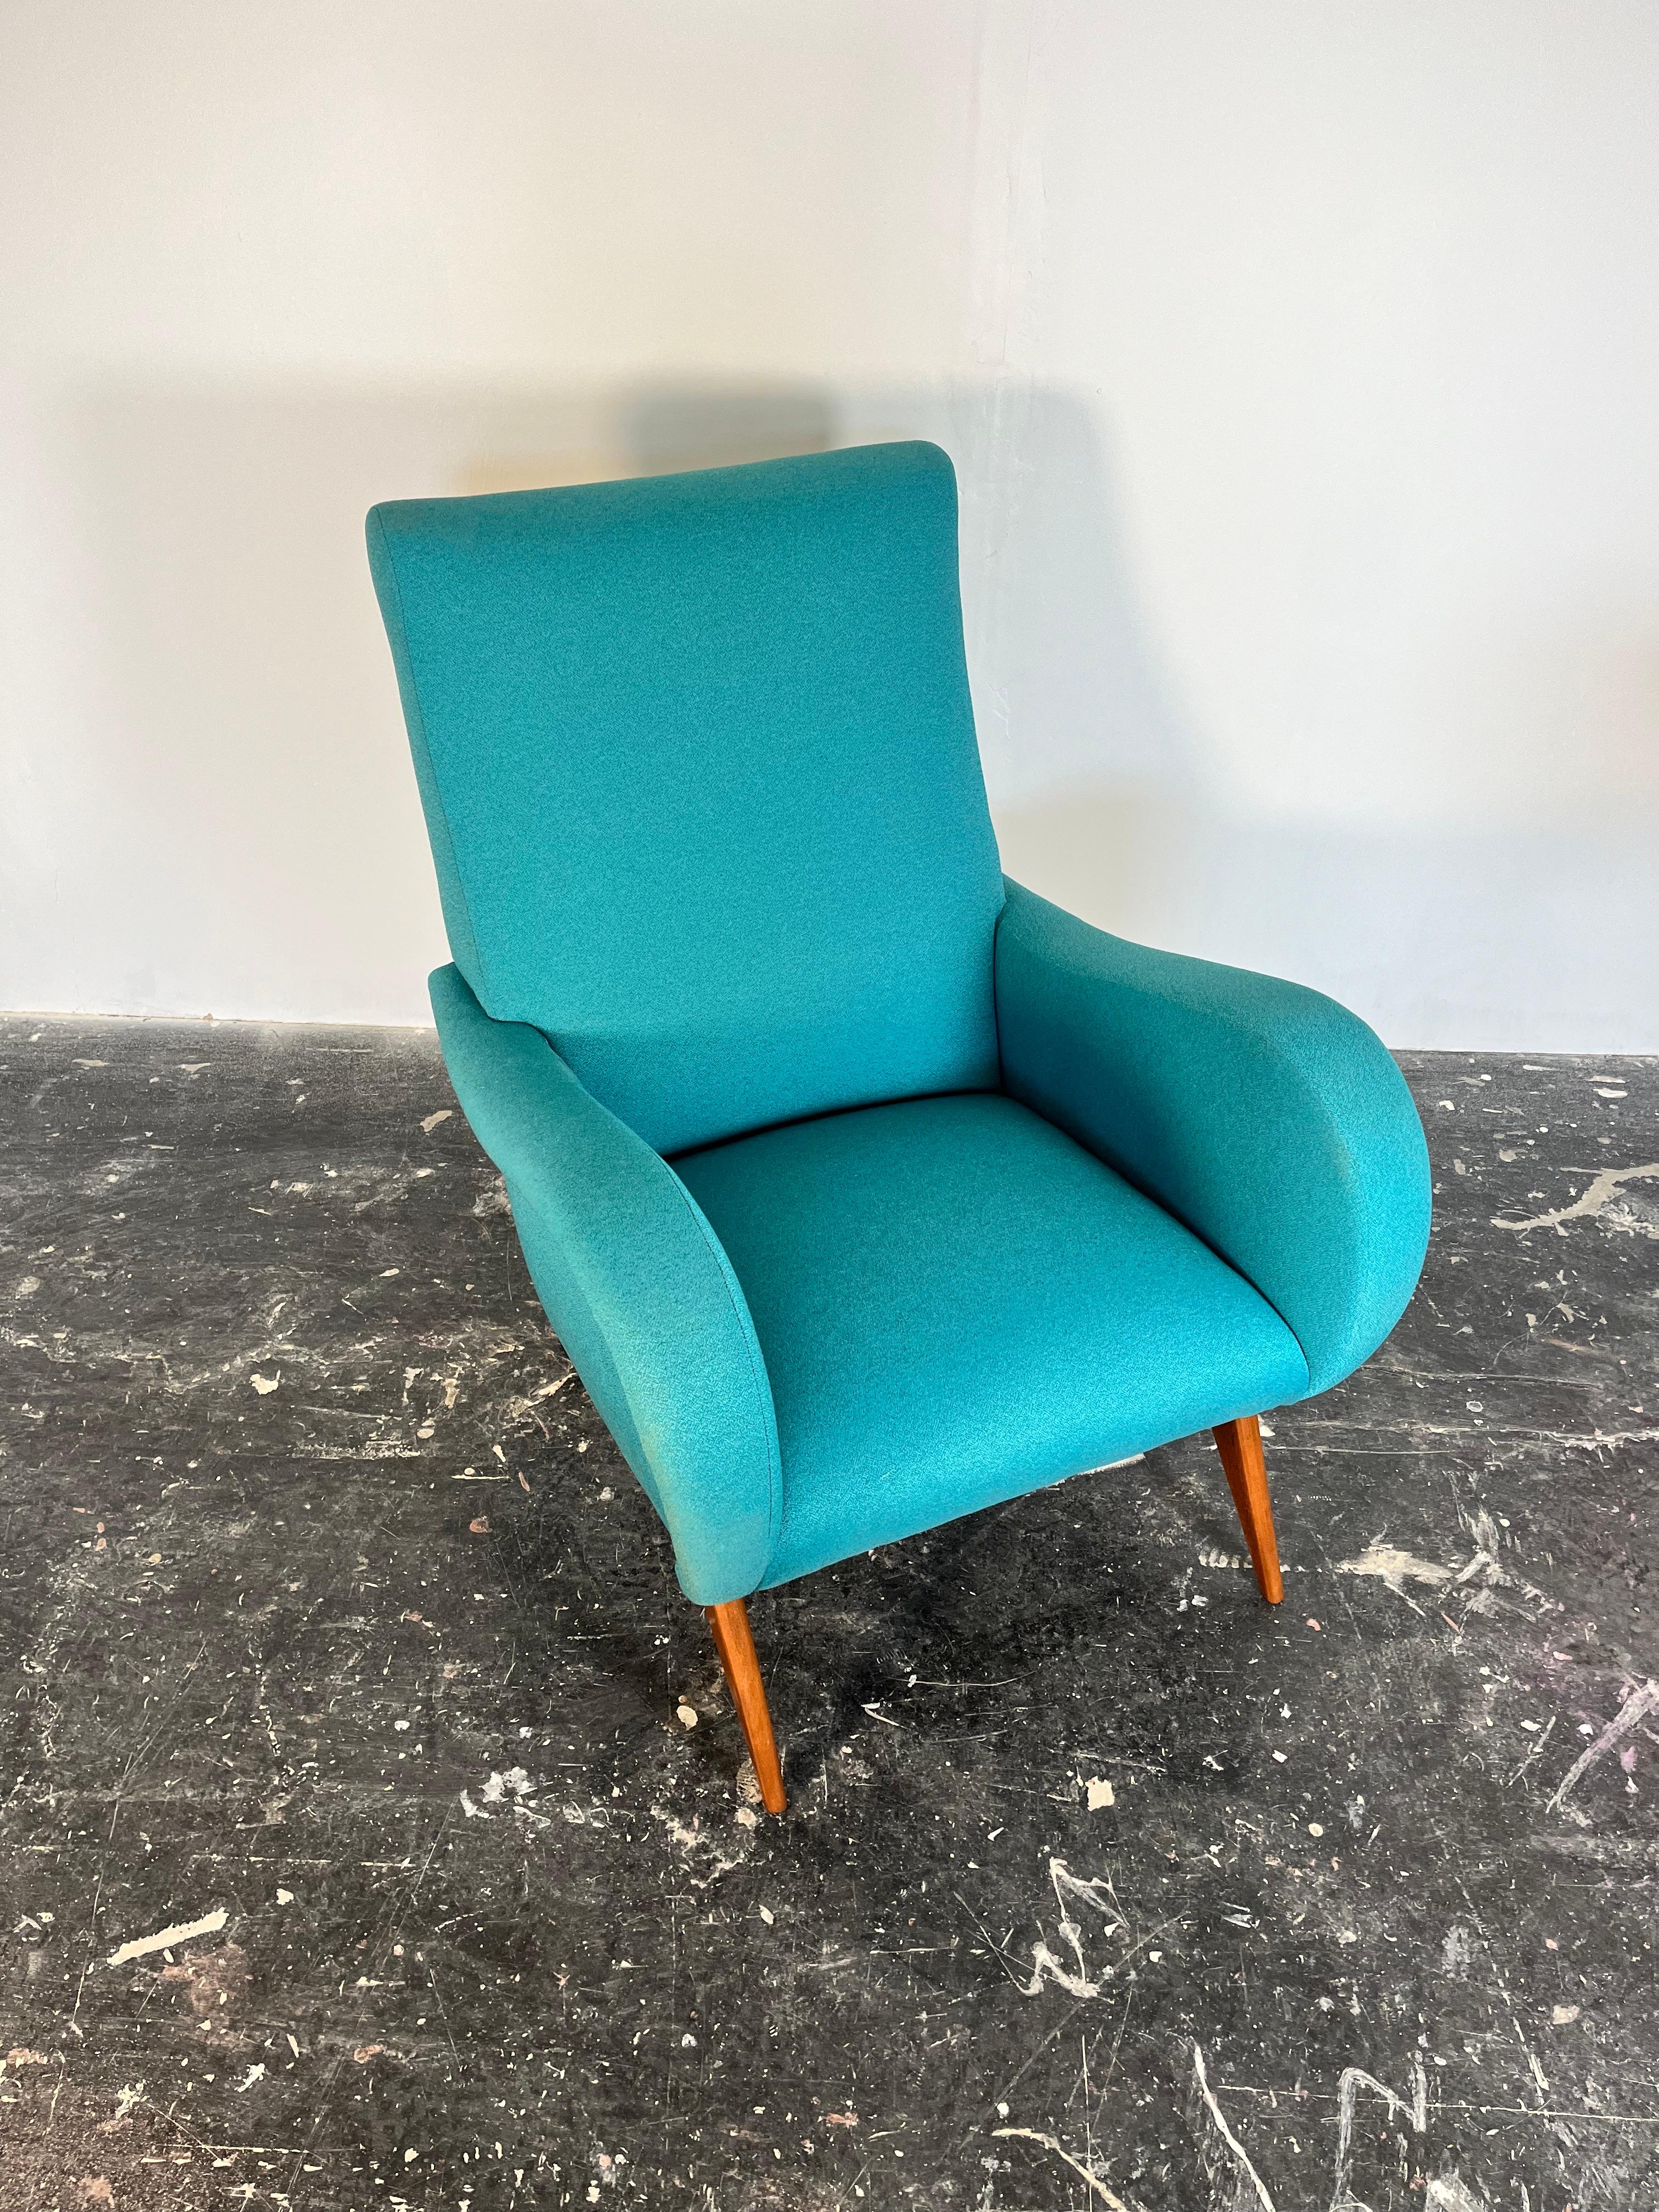 This chair features the iconic upholstered structure and curved armrests that embodies the timeless appeal of mid-century furniture, combining technical excellence, refined craftsmanship, and a touch of luxury.

Reupholstered in a stunning